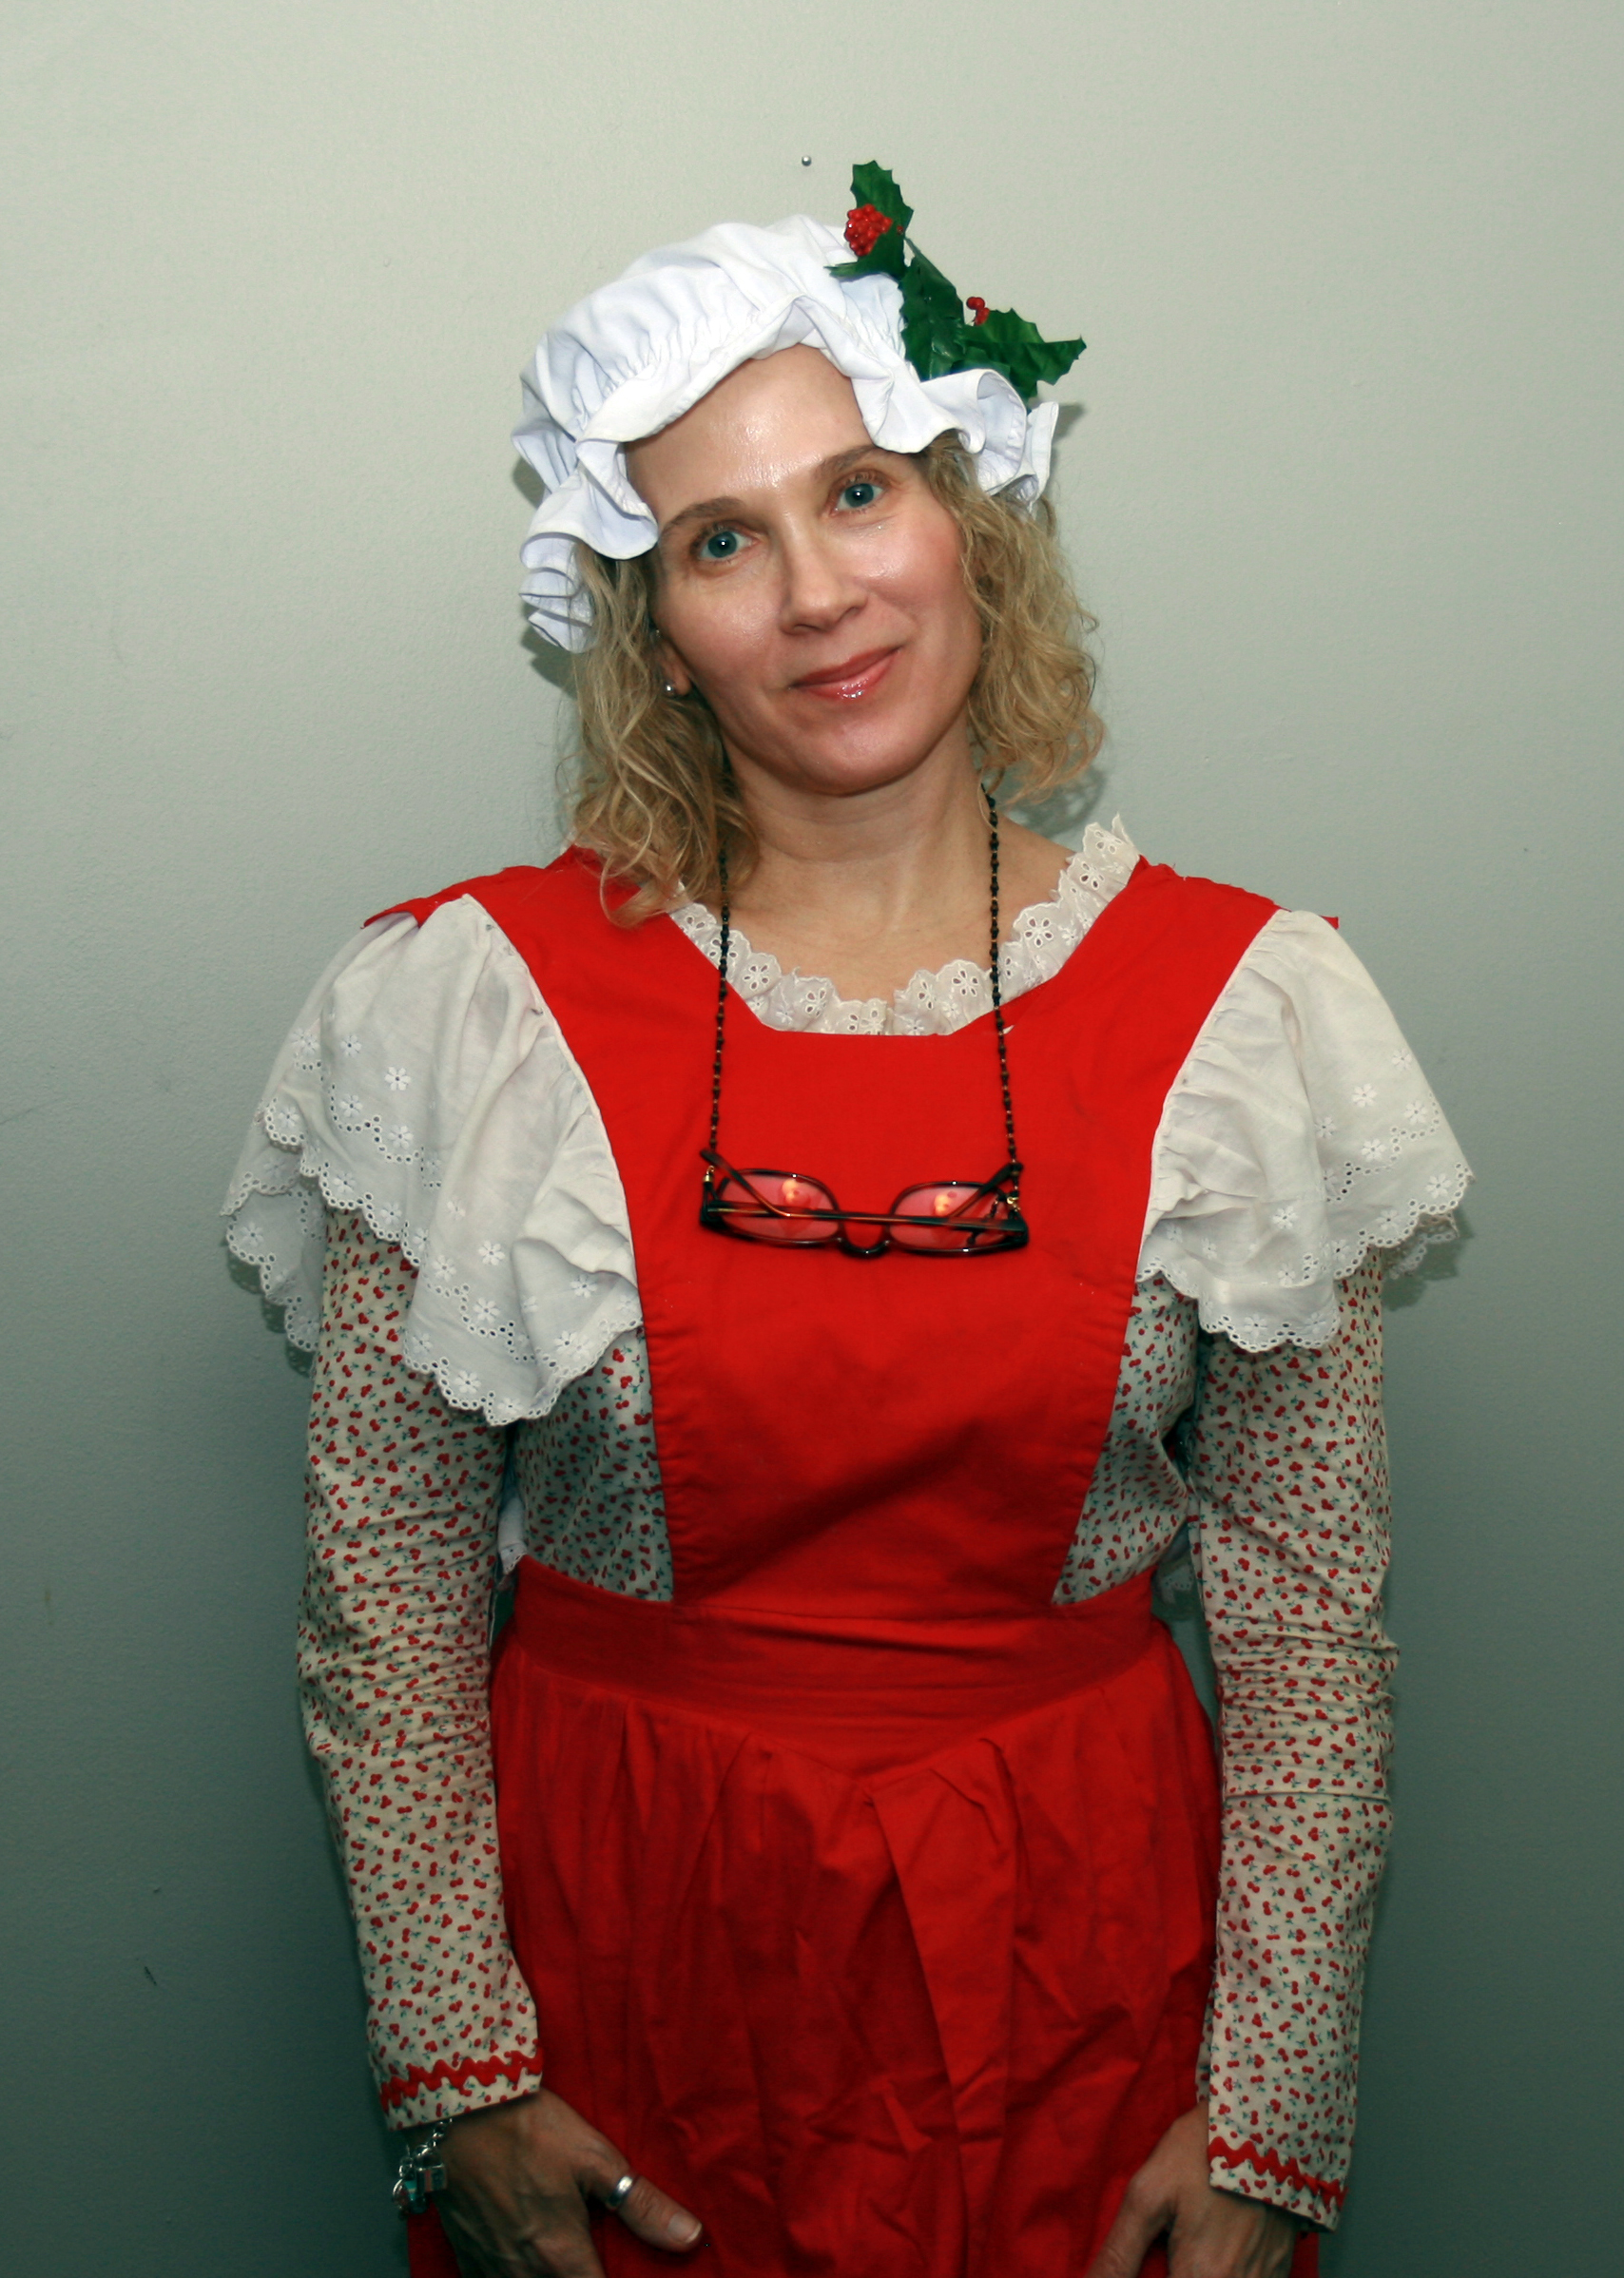 Melody Meadows as Mrs. Claus